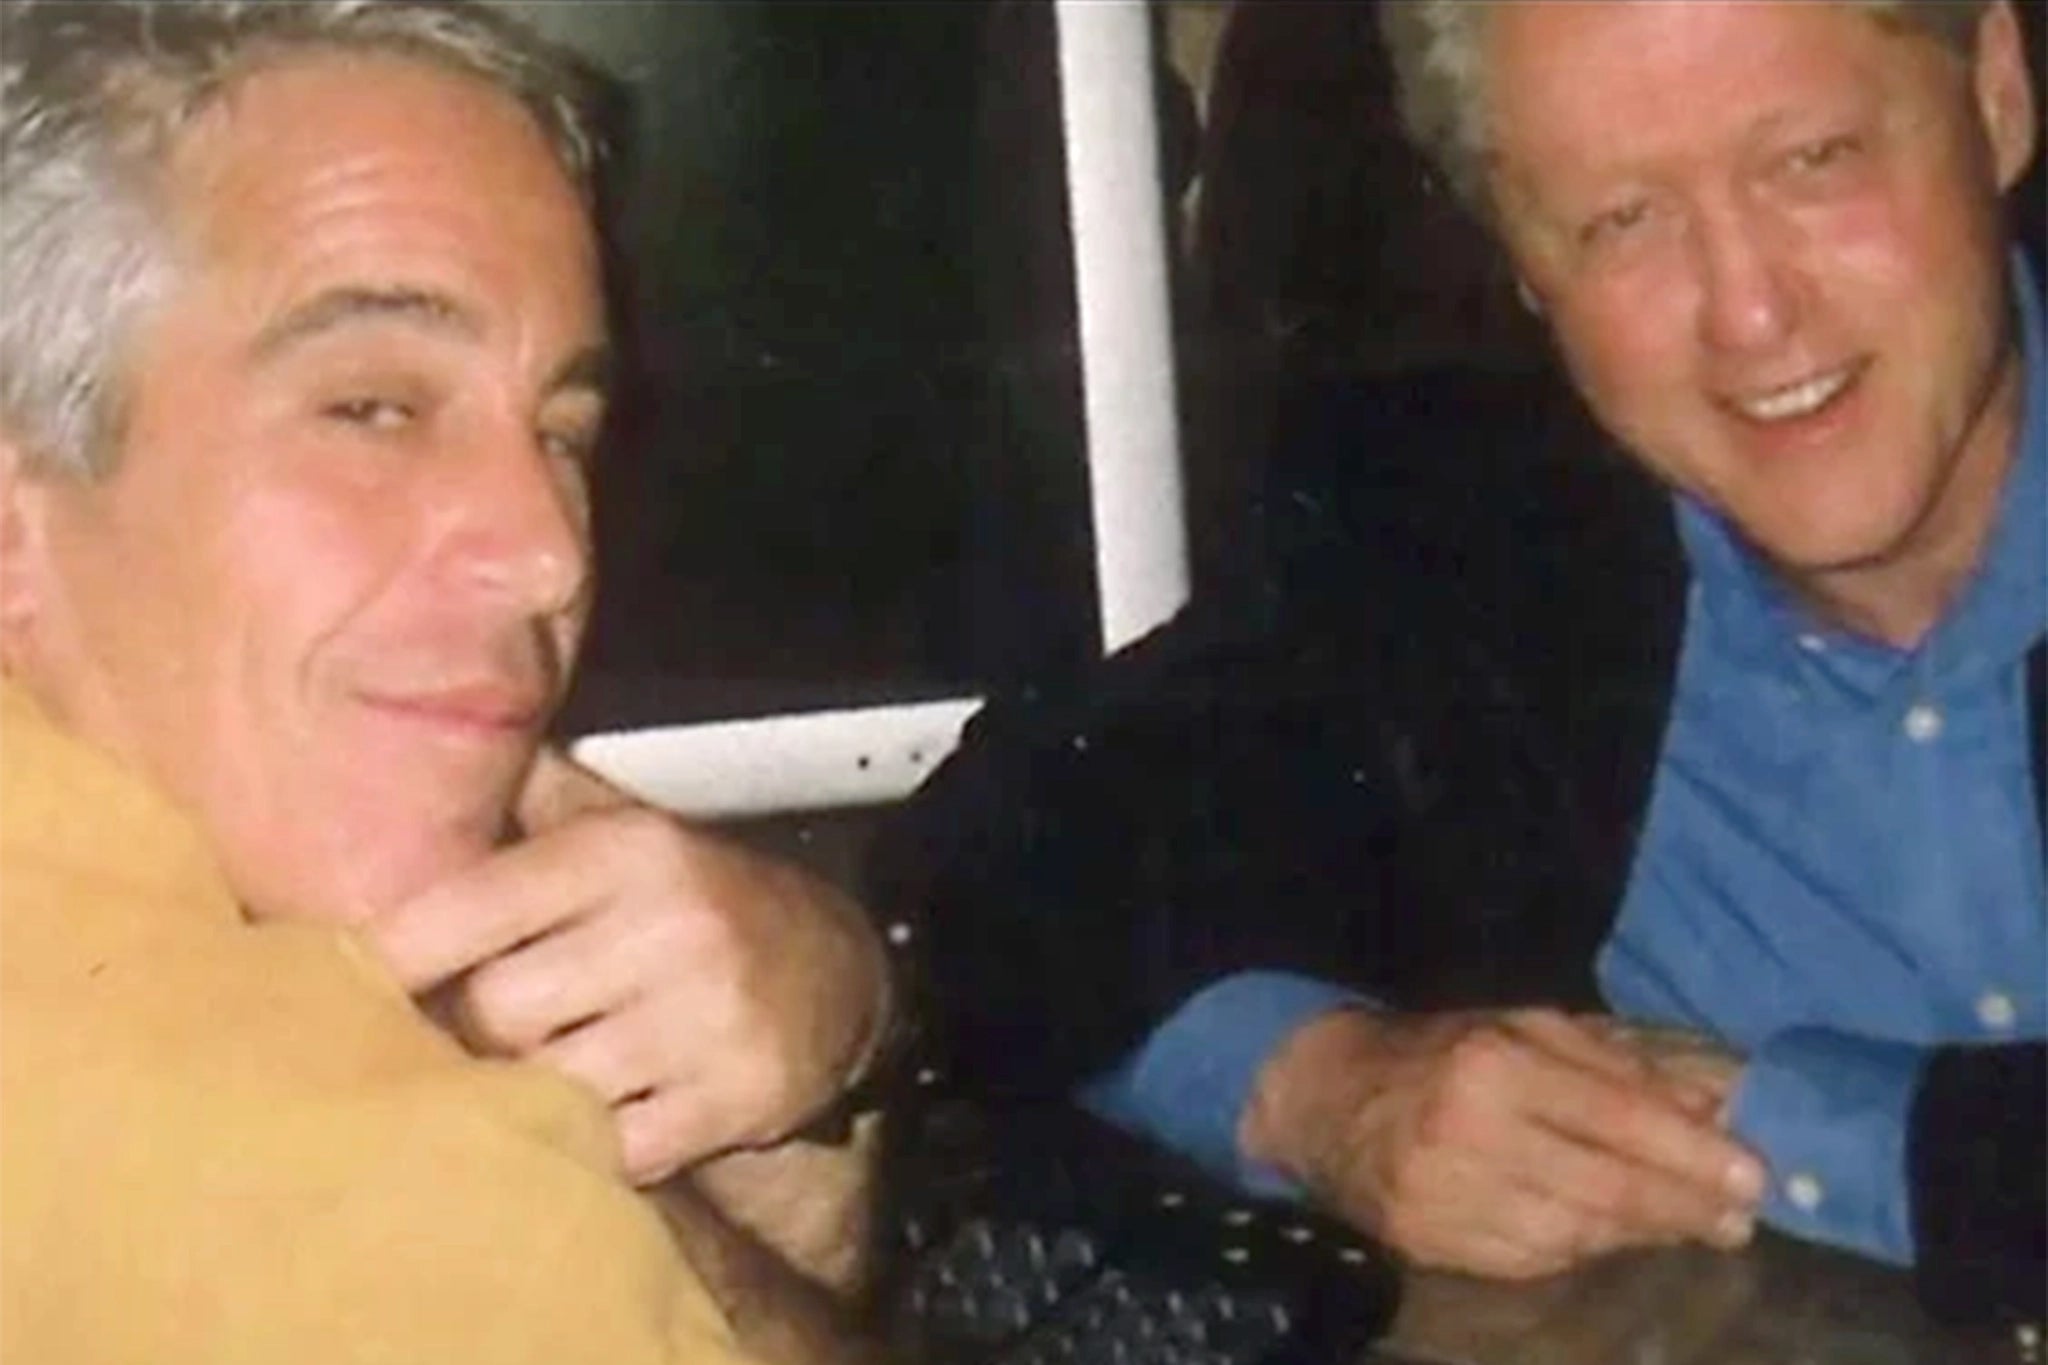 Jeffrey Epstein and Bill Clinton pictured together